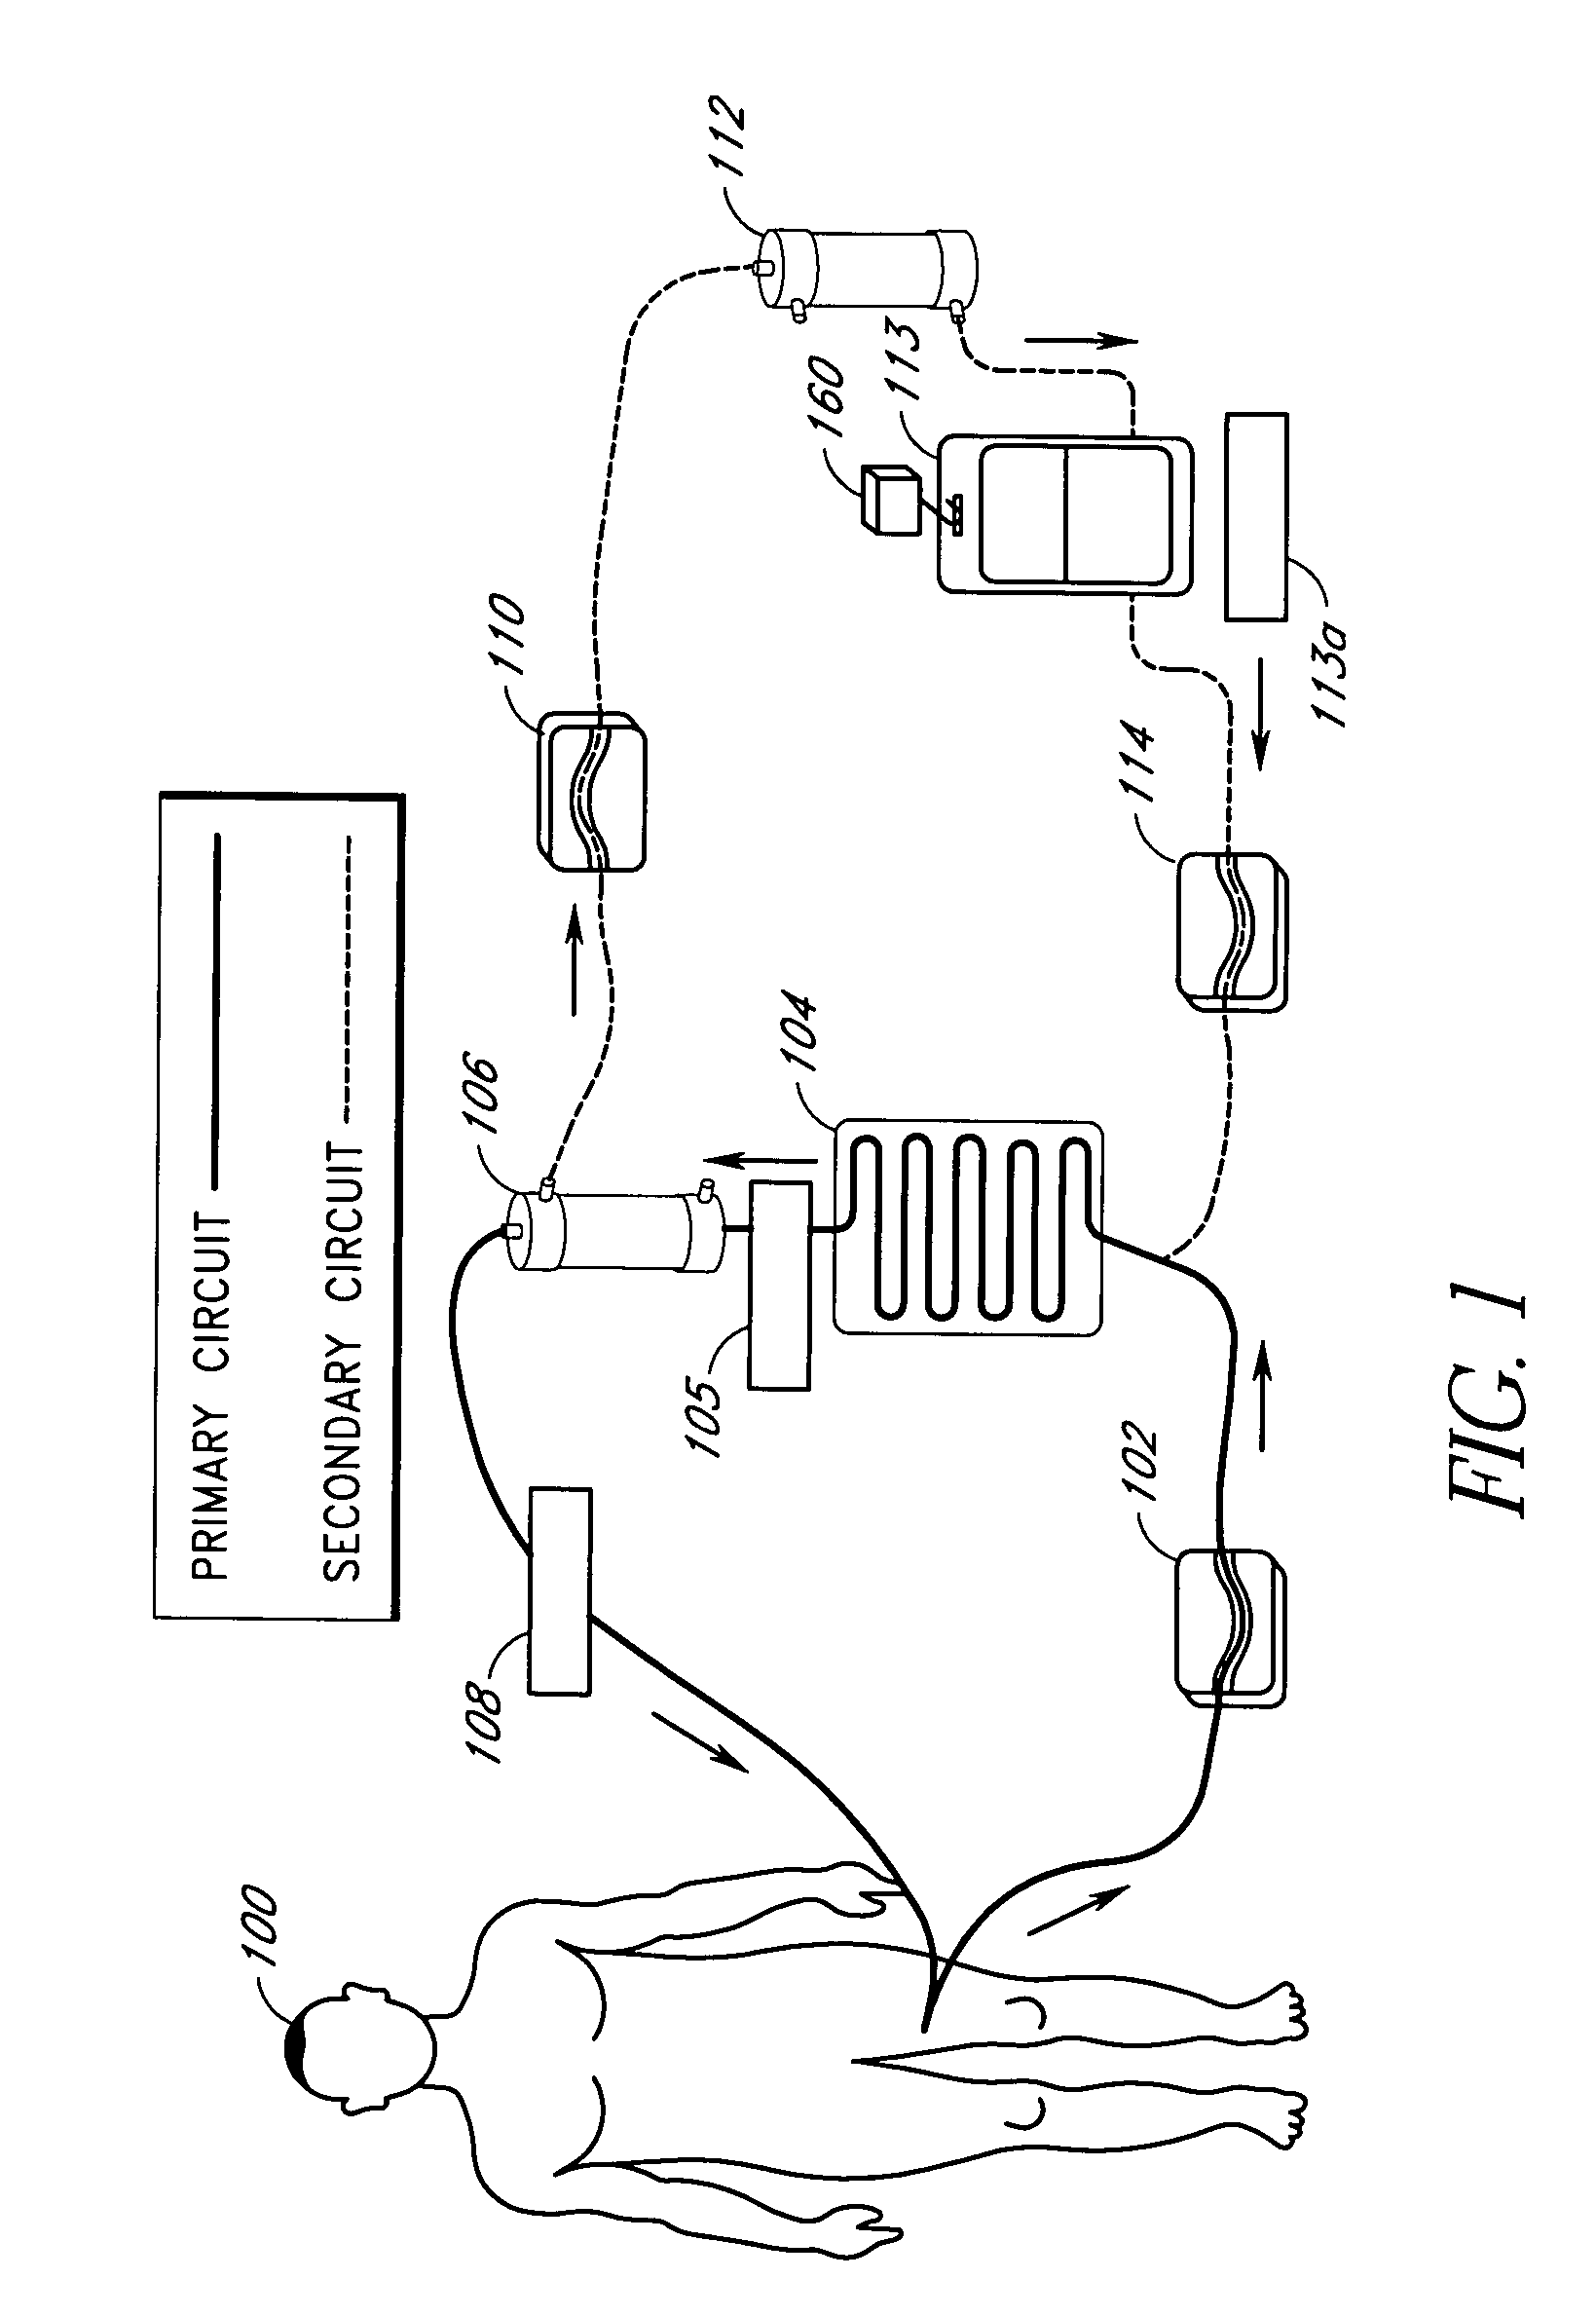 Extracorporeal blood treatment system using ultraviolet light and filters